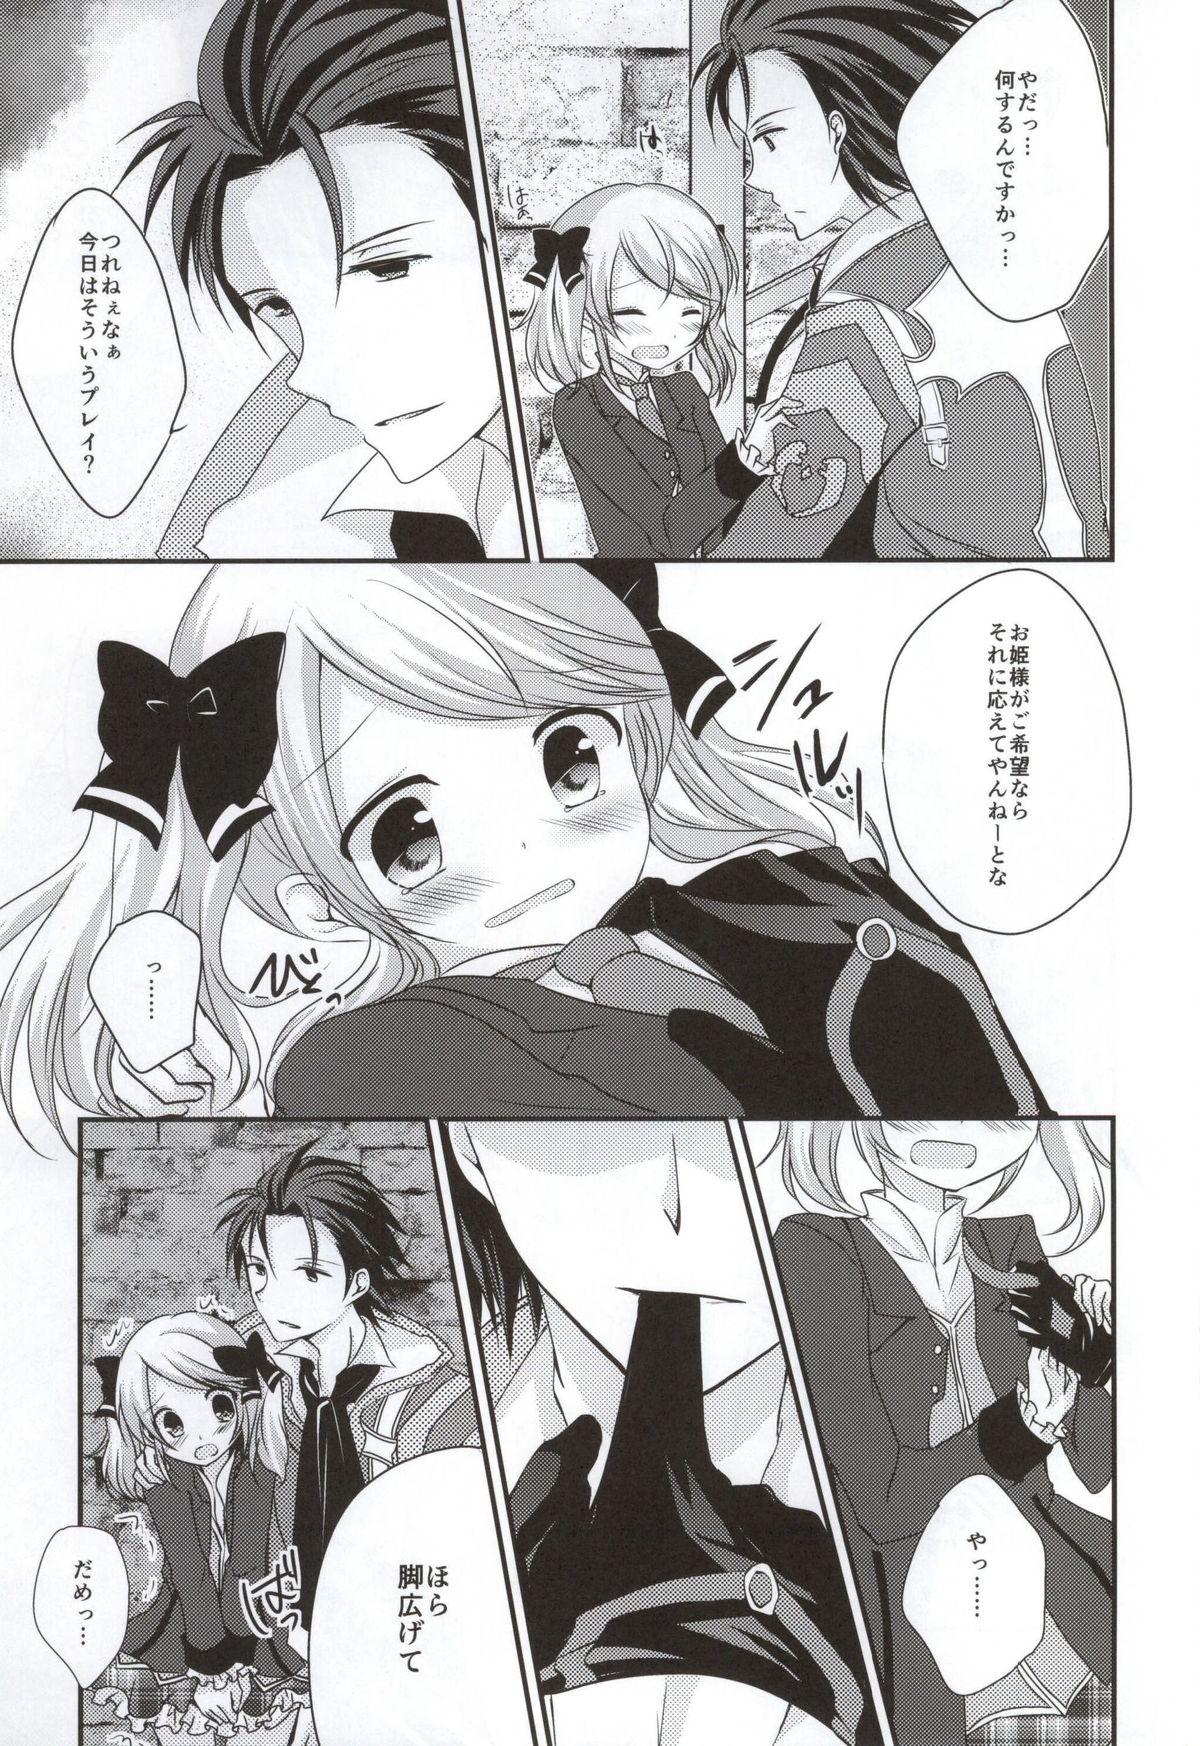 Horny Sluts Gekijou Another - Tales of xillia Straight - Page 9